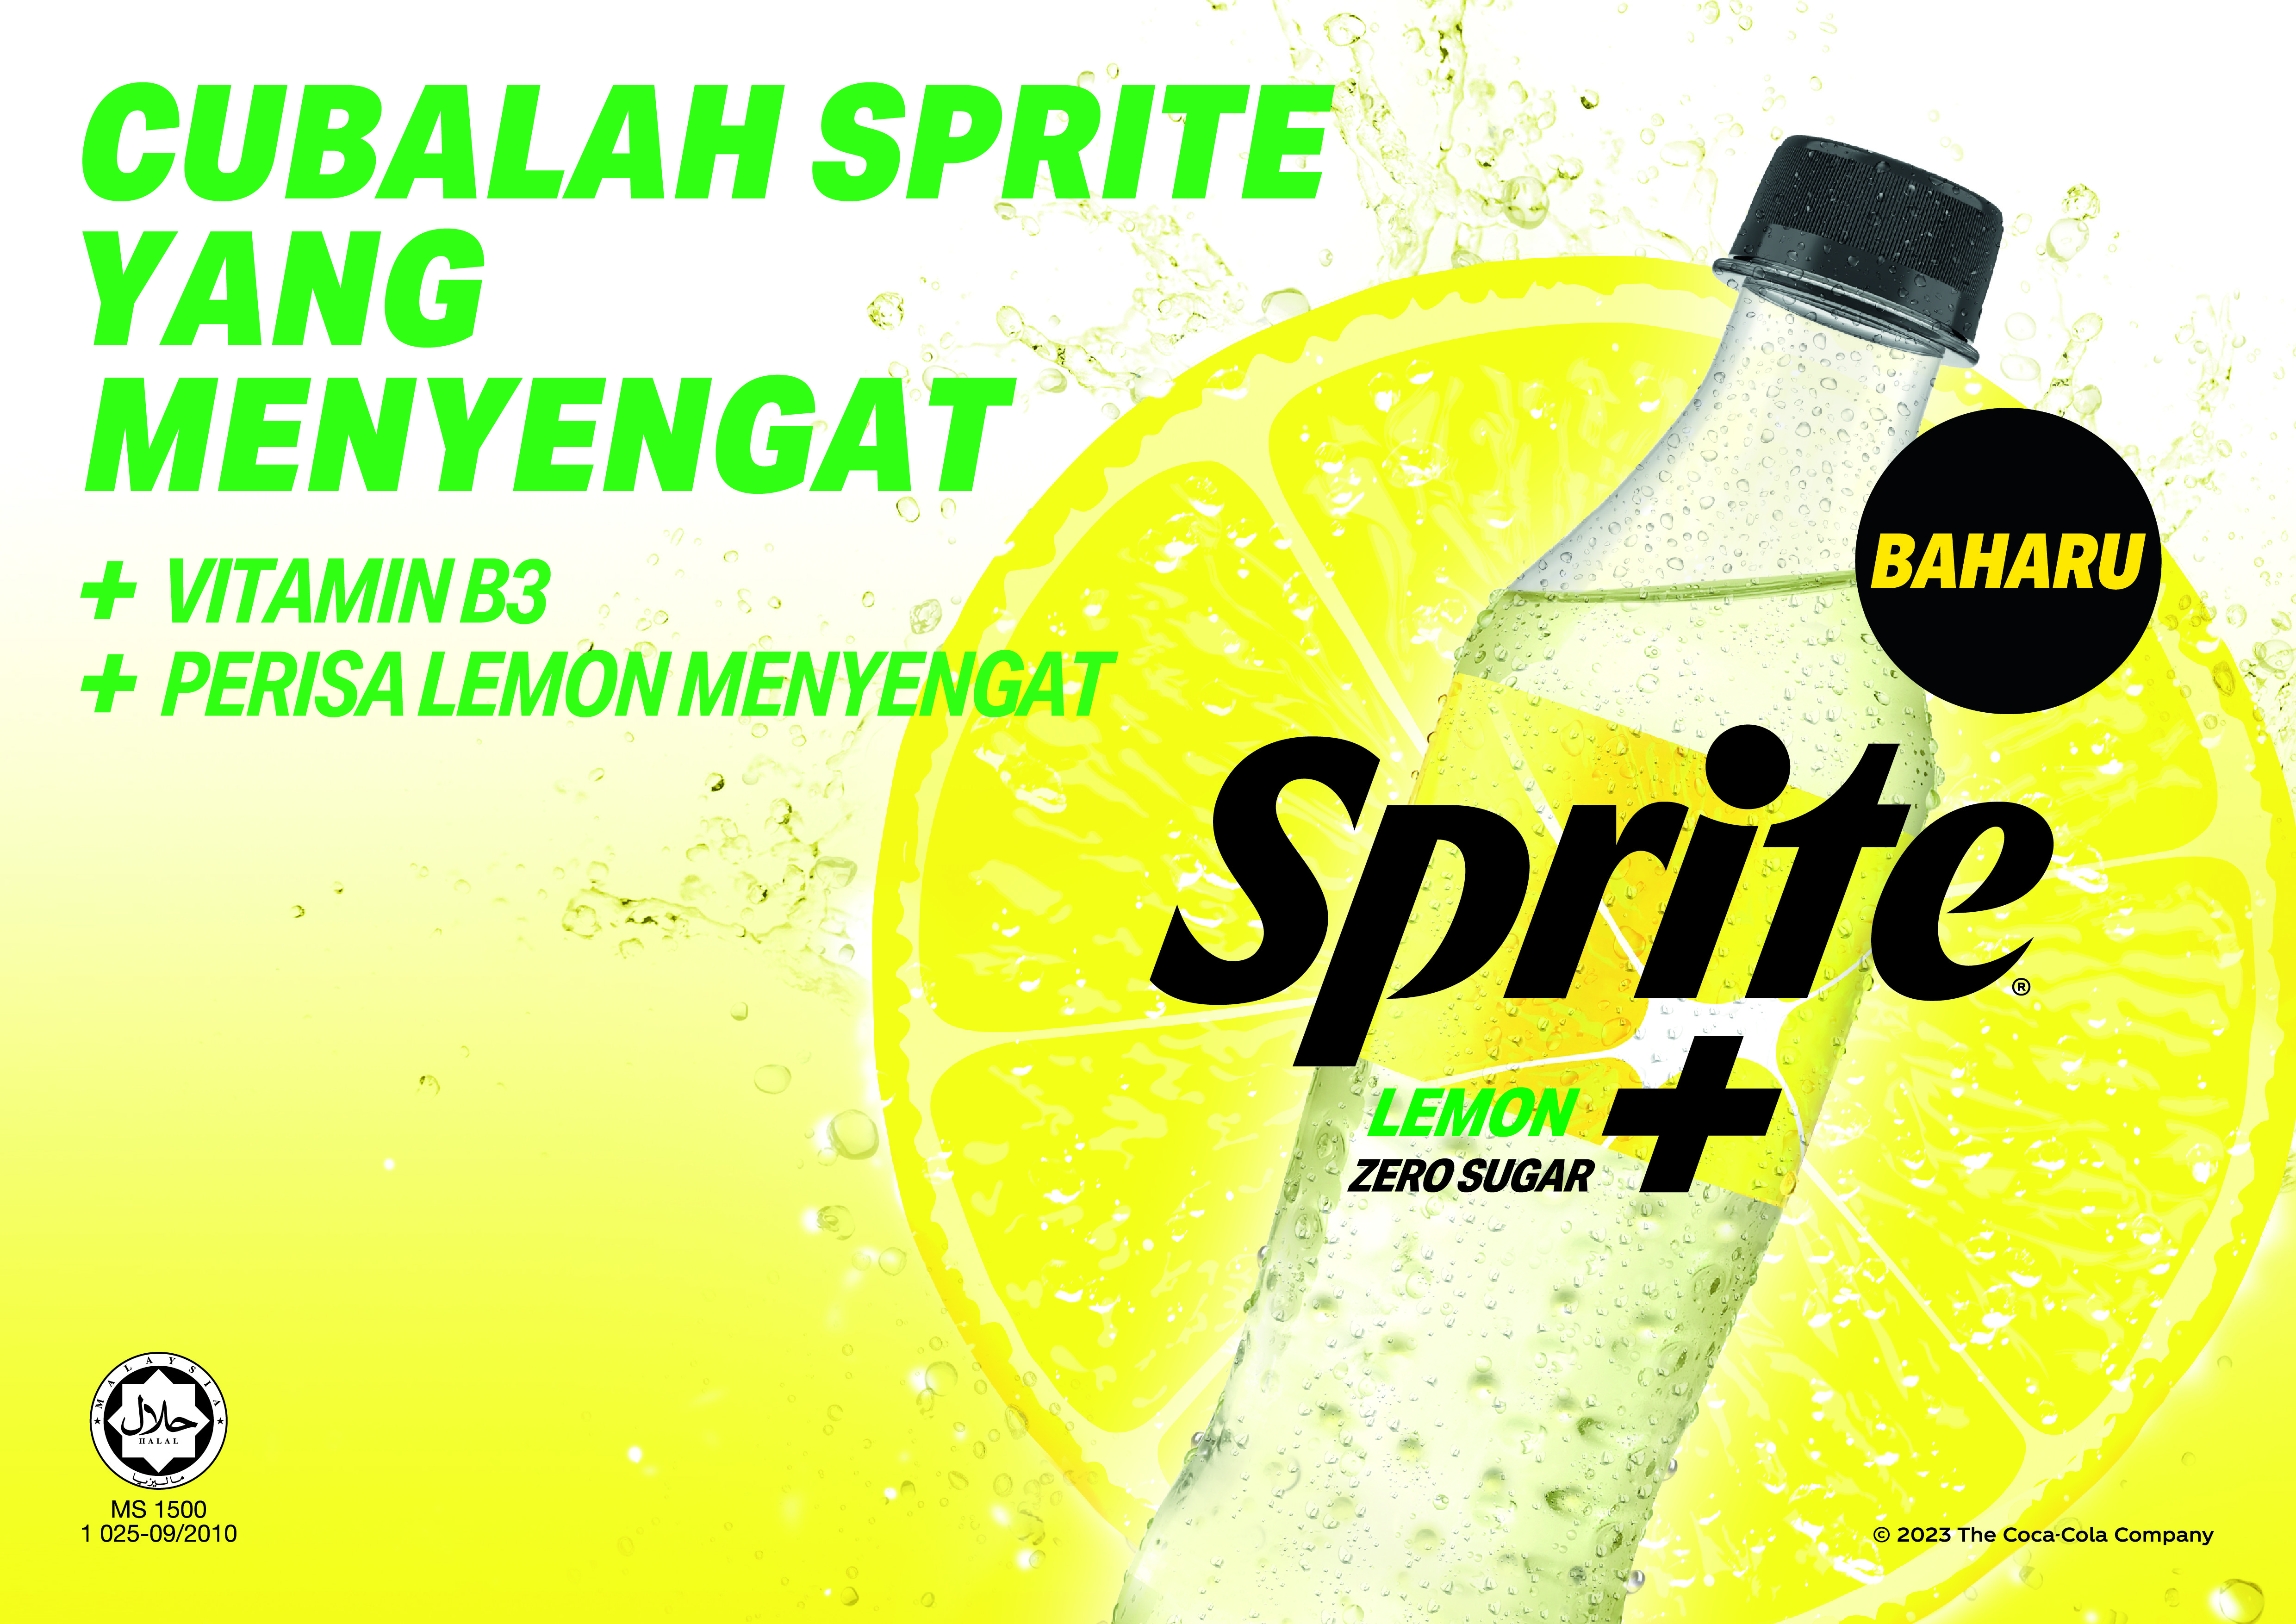 Introducing Sprite® Lemon+: Latest Sprite Innovation in Malaysia, Featuring  Extra Zesty Lemon Flavour and Vitamin B3 Boost